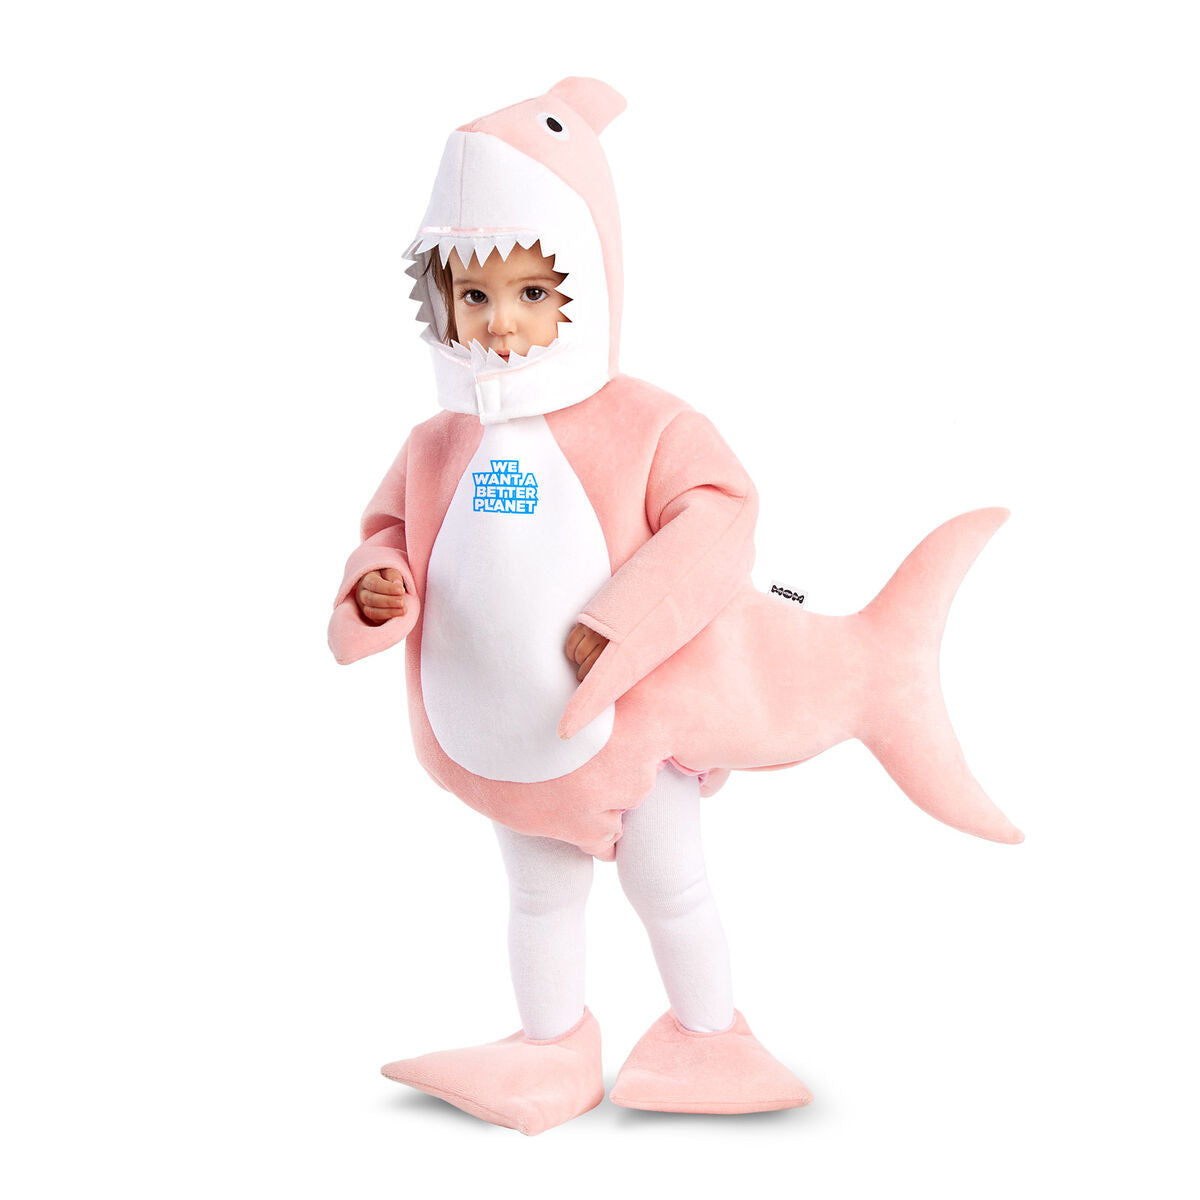 Costume for Children My Other Me Shark Pink (3 Pieces)